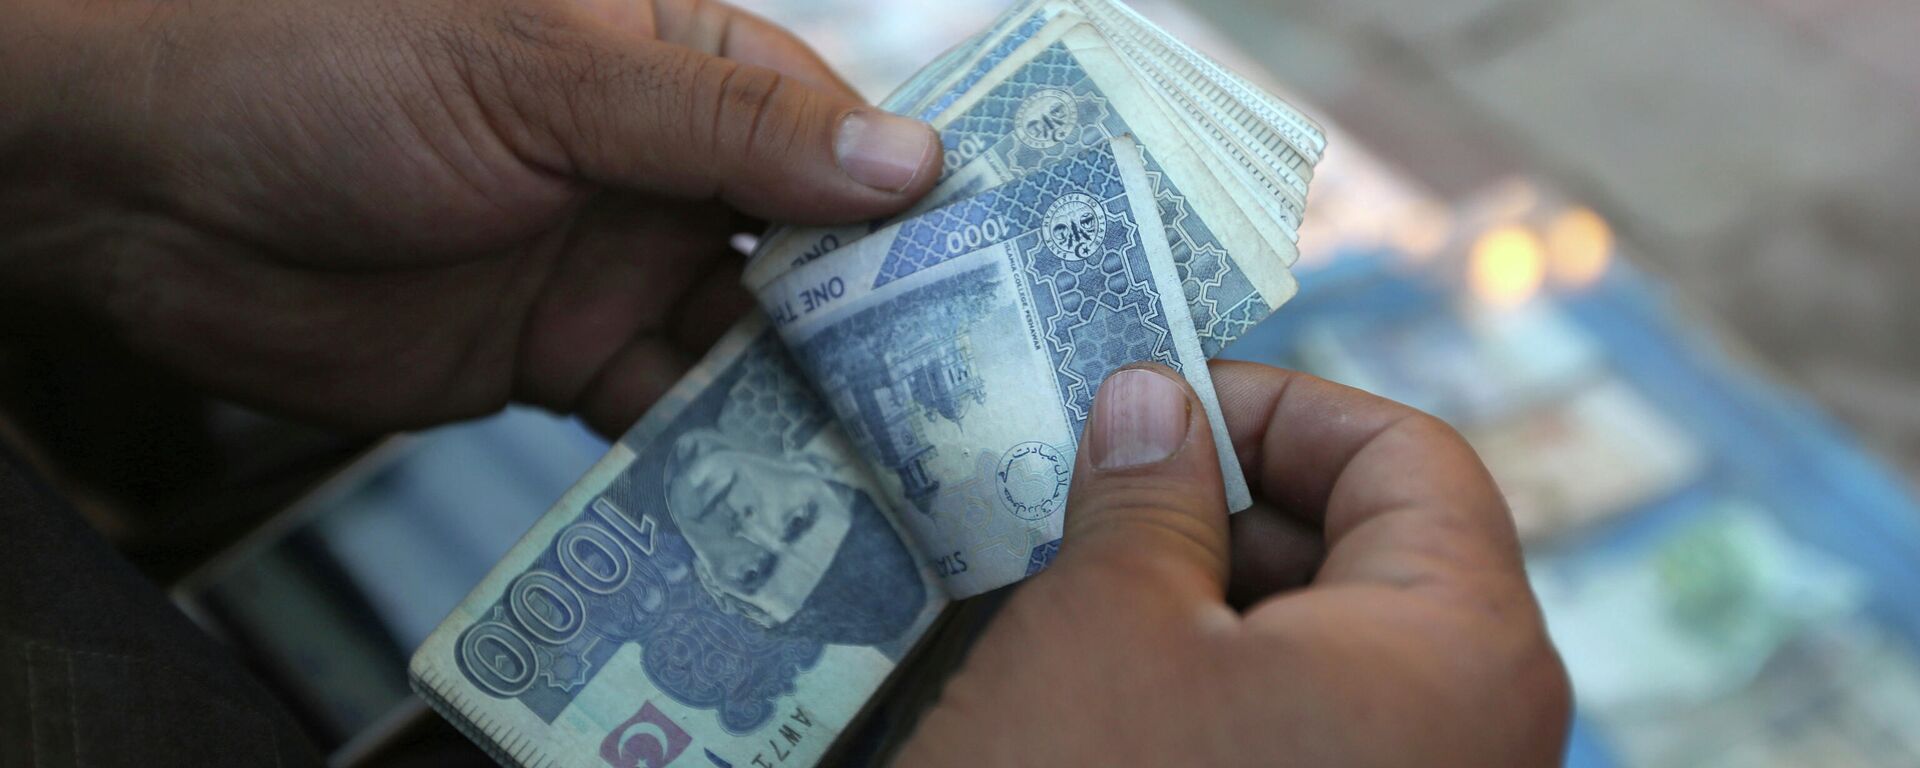 In this Monday, Dec. 5, 2016 photo, an Afghan money changer counts Pakistani currency banknotes at a money exchange market in Kabul, Afghanistan. Afghans are increasingly uncertain about their future, less confident in their government and more pessimistic than before on issues such as security, corruption, and rising unemployment, according to the annual survey by the San Francisco-based Asia Foundation released on Wednesday, Dec. 7, 2016. (AP Photo/Rahmat Gul) - Sputnik International, 1920, 02.11.2021